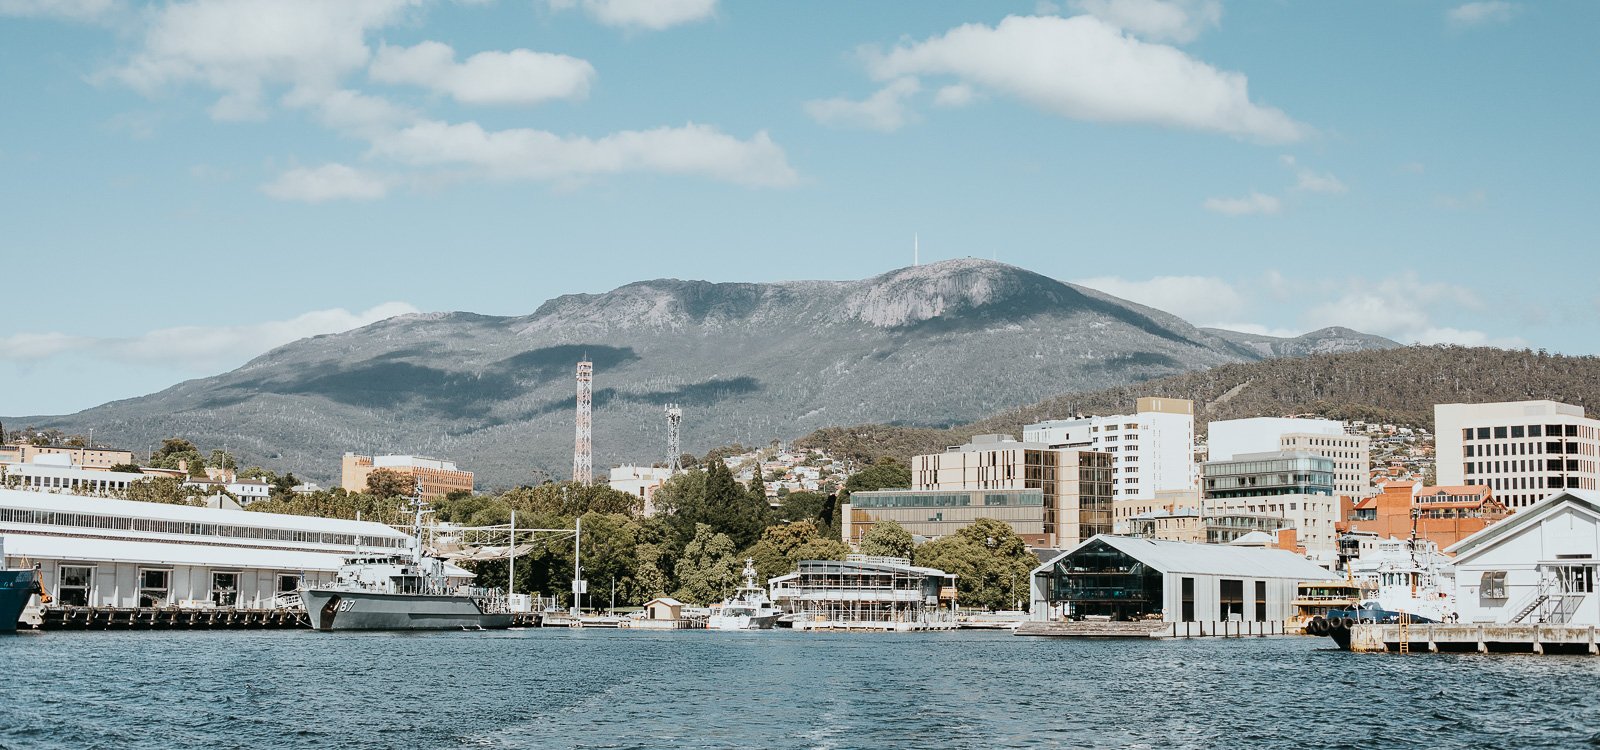 Hobart waterfront with Mt Wellington in the background